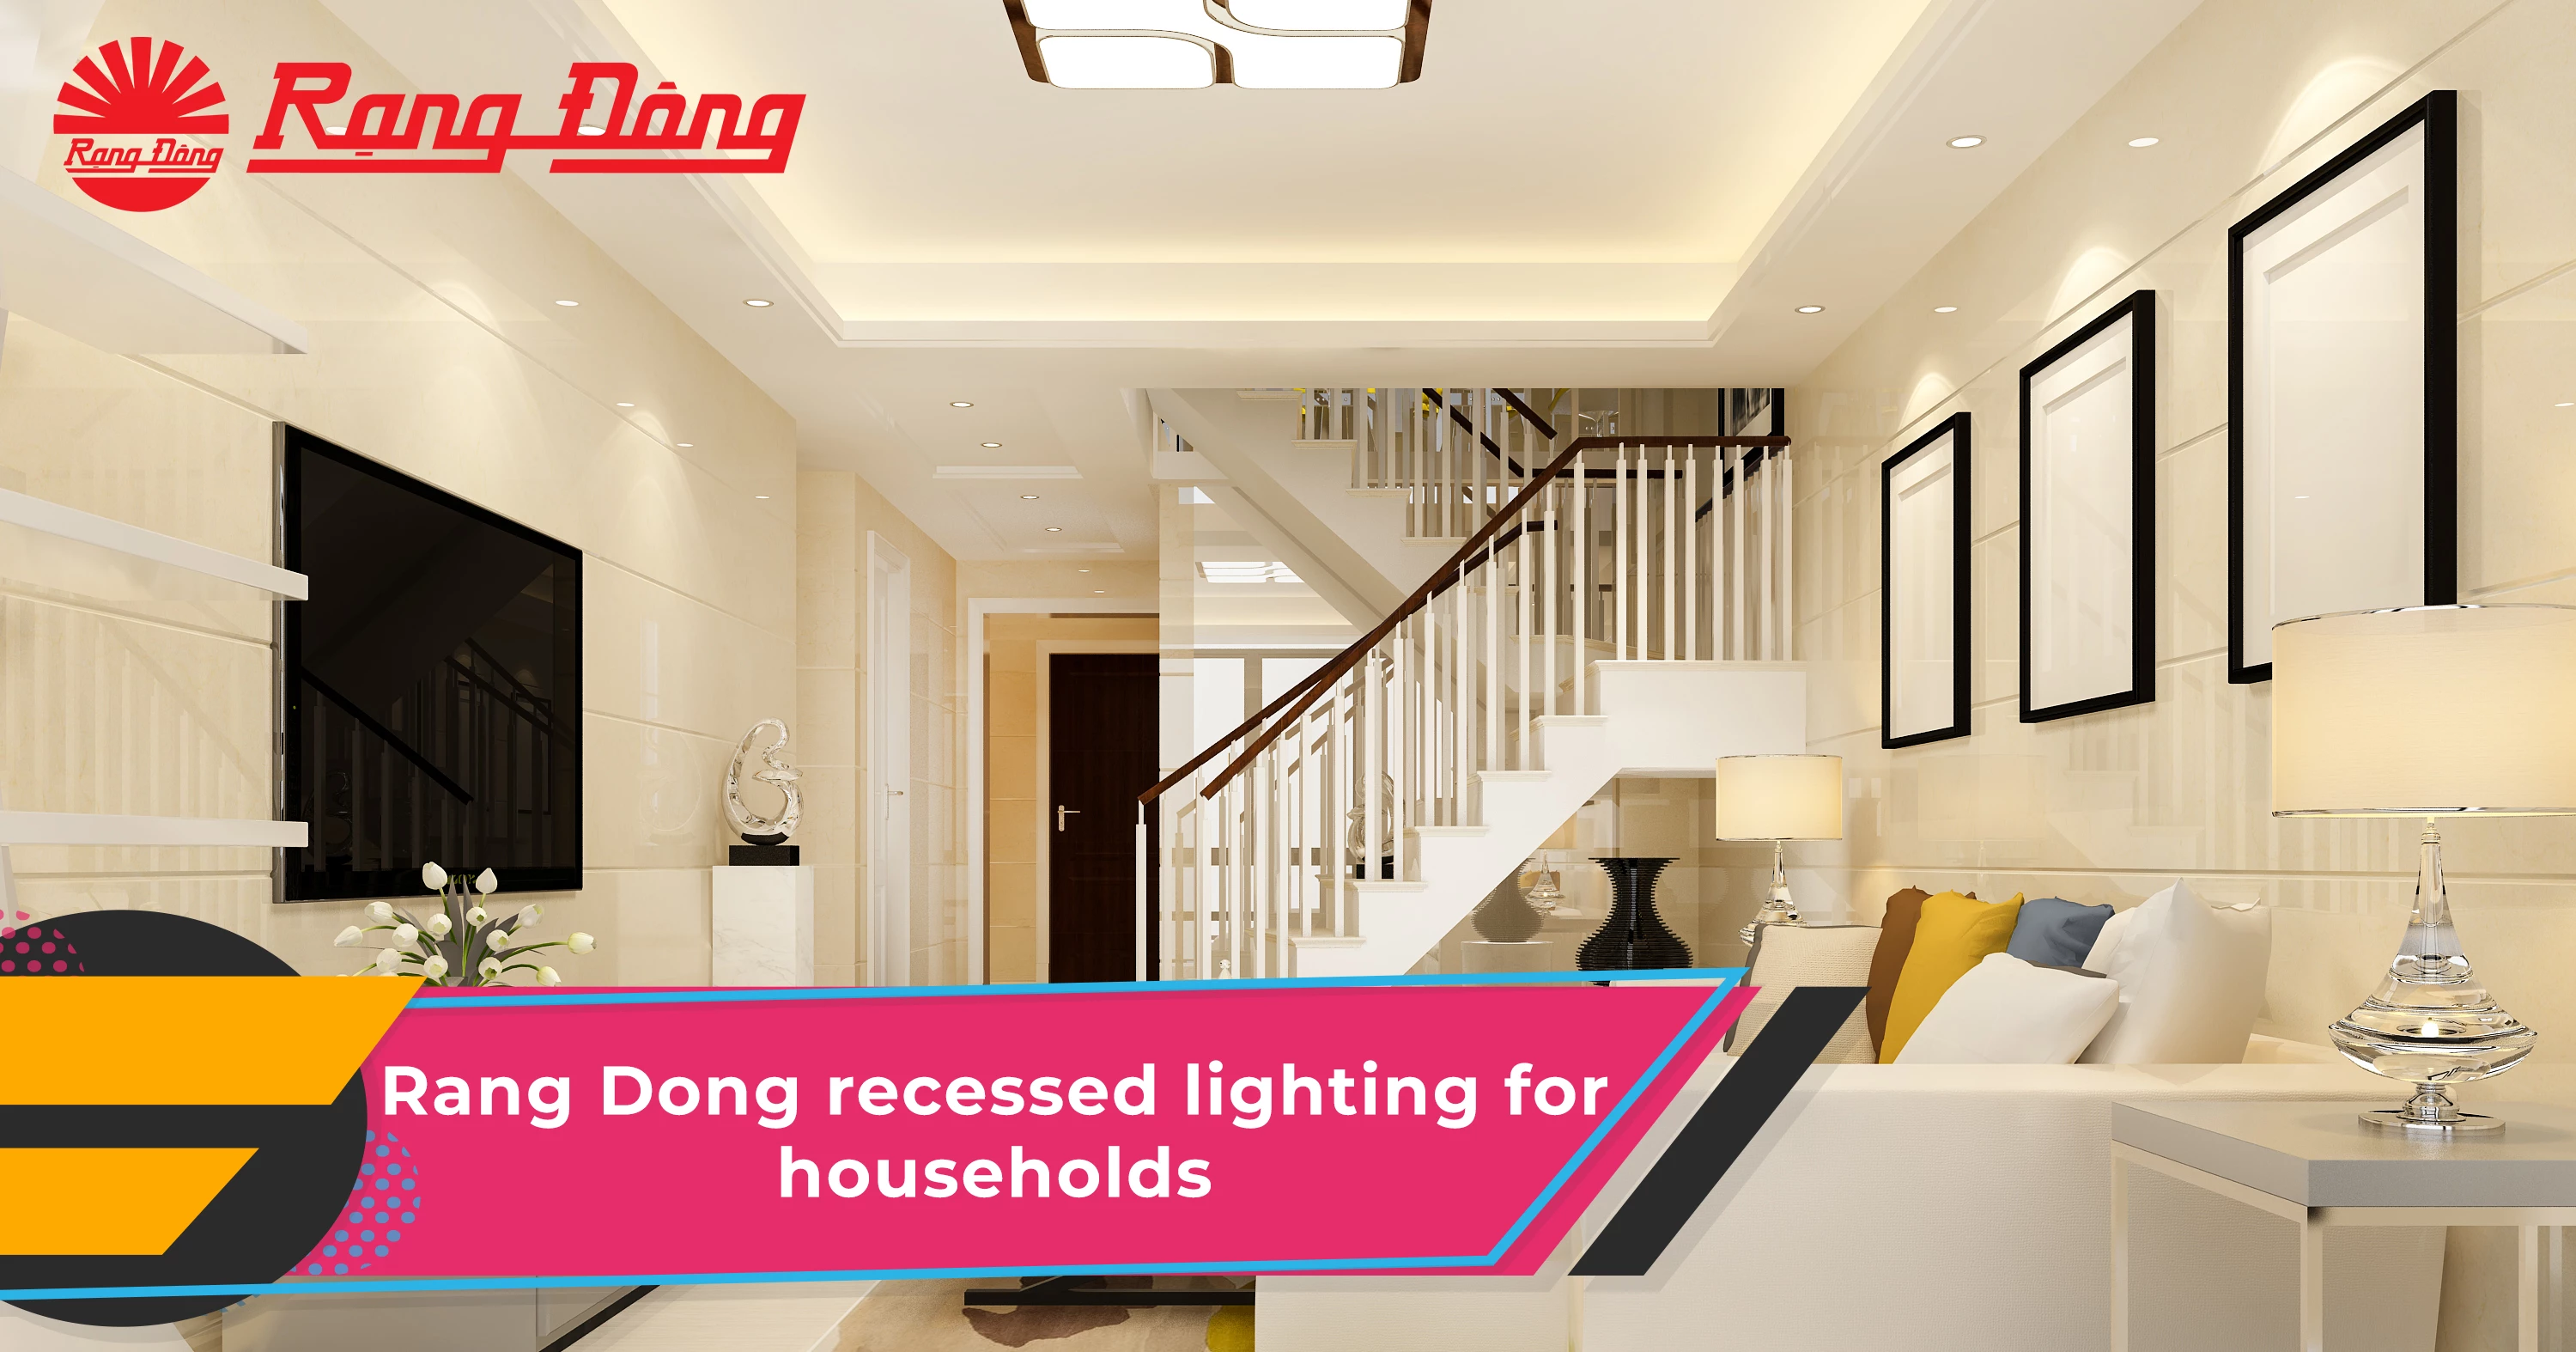 Rang Dong's recessed lighting well fit in a modern home